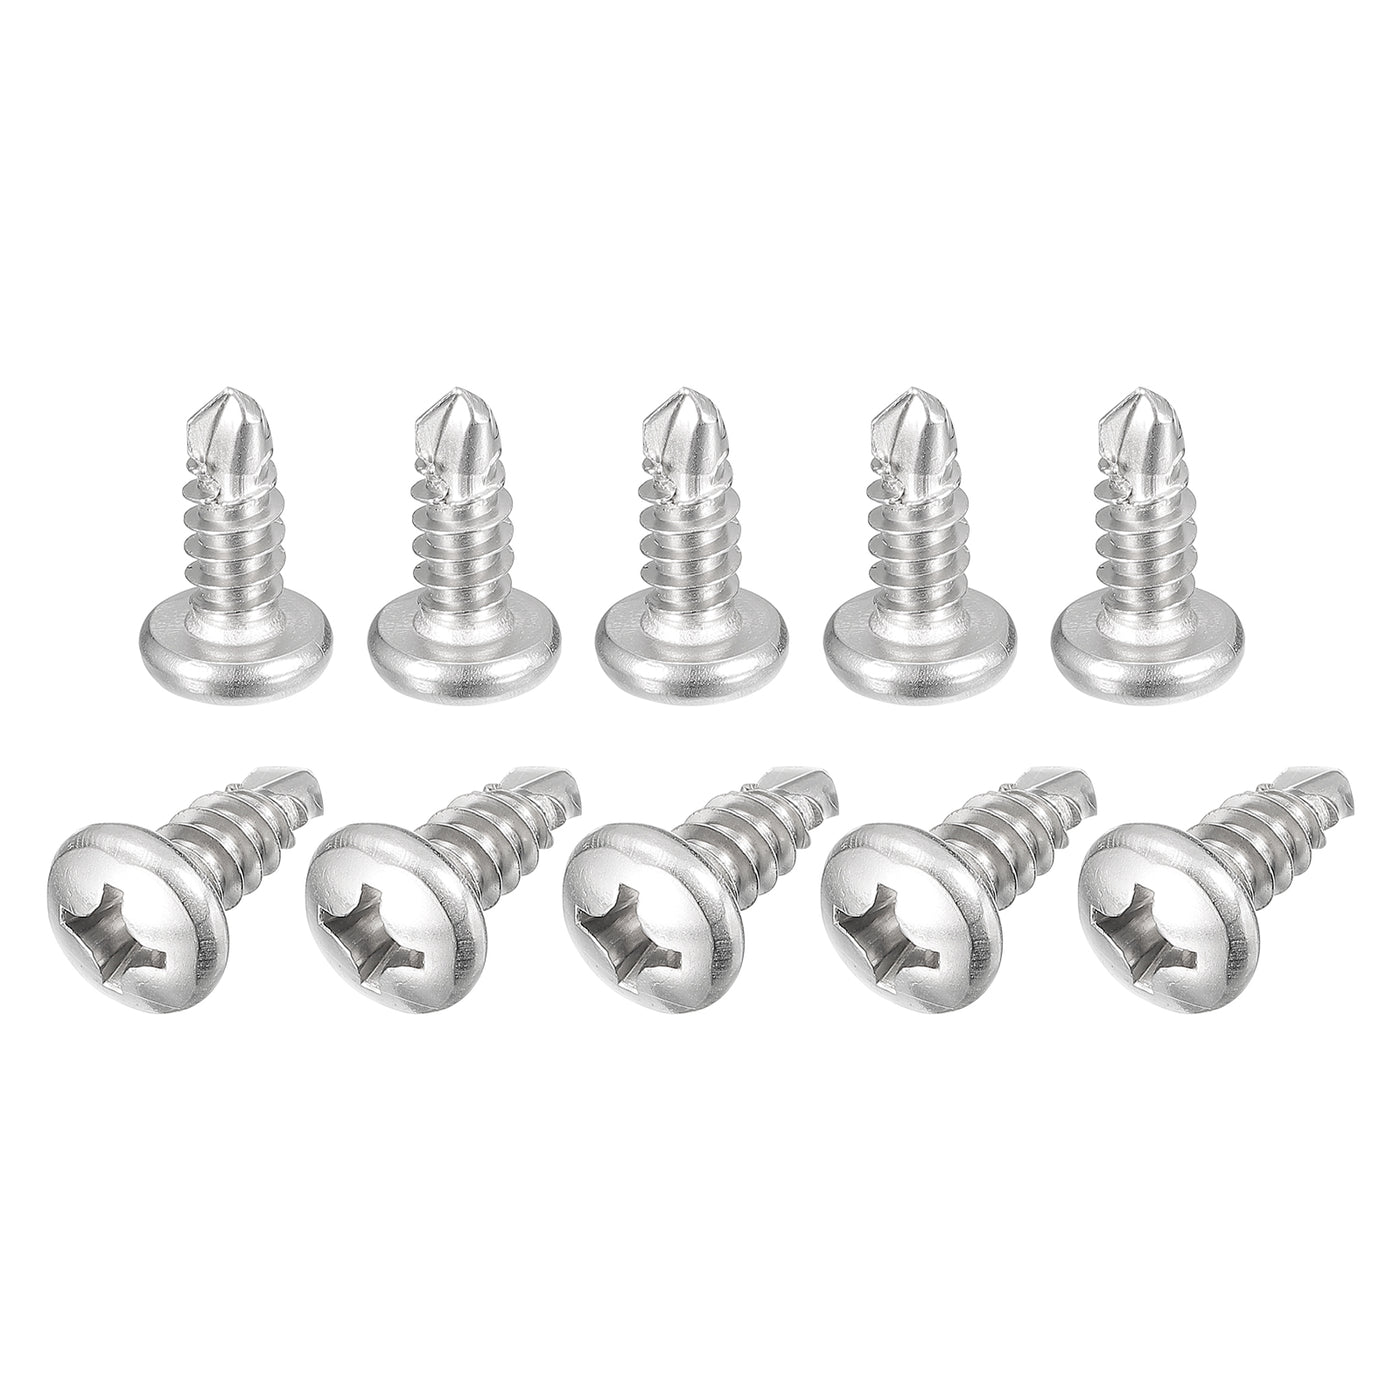 uxcell Uxcell #14 x 5/8" Self Drilling Screws, 10pcs Phillips Pan Head Self Tapping Screws